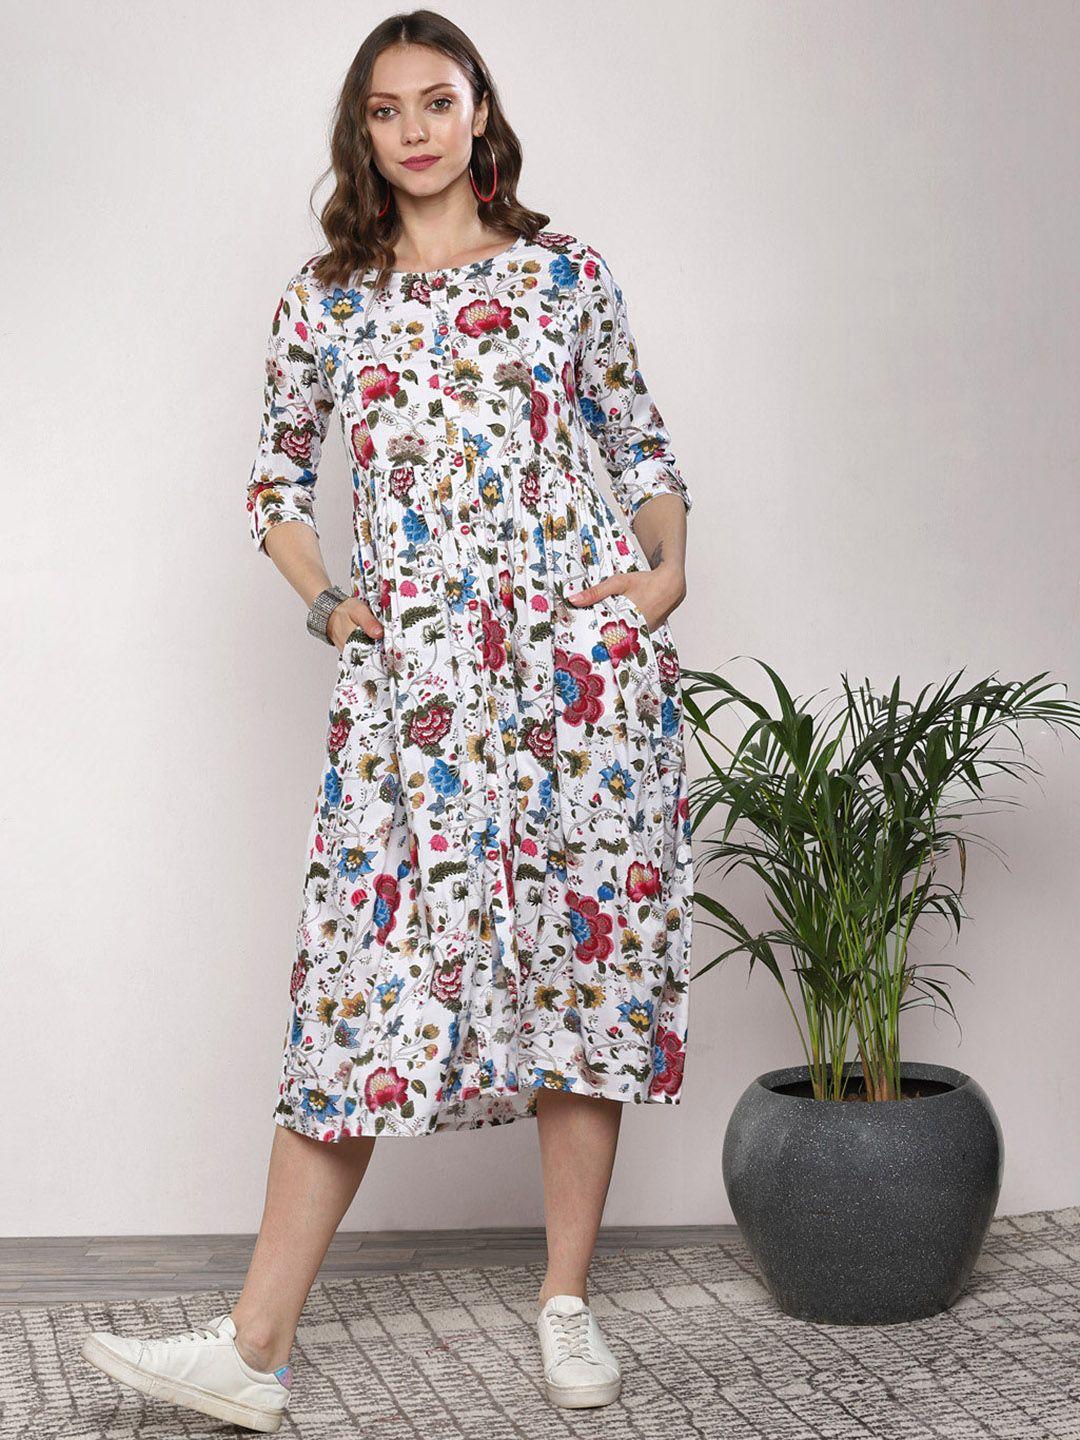 sangria white floral printed fit and flare dress